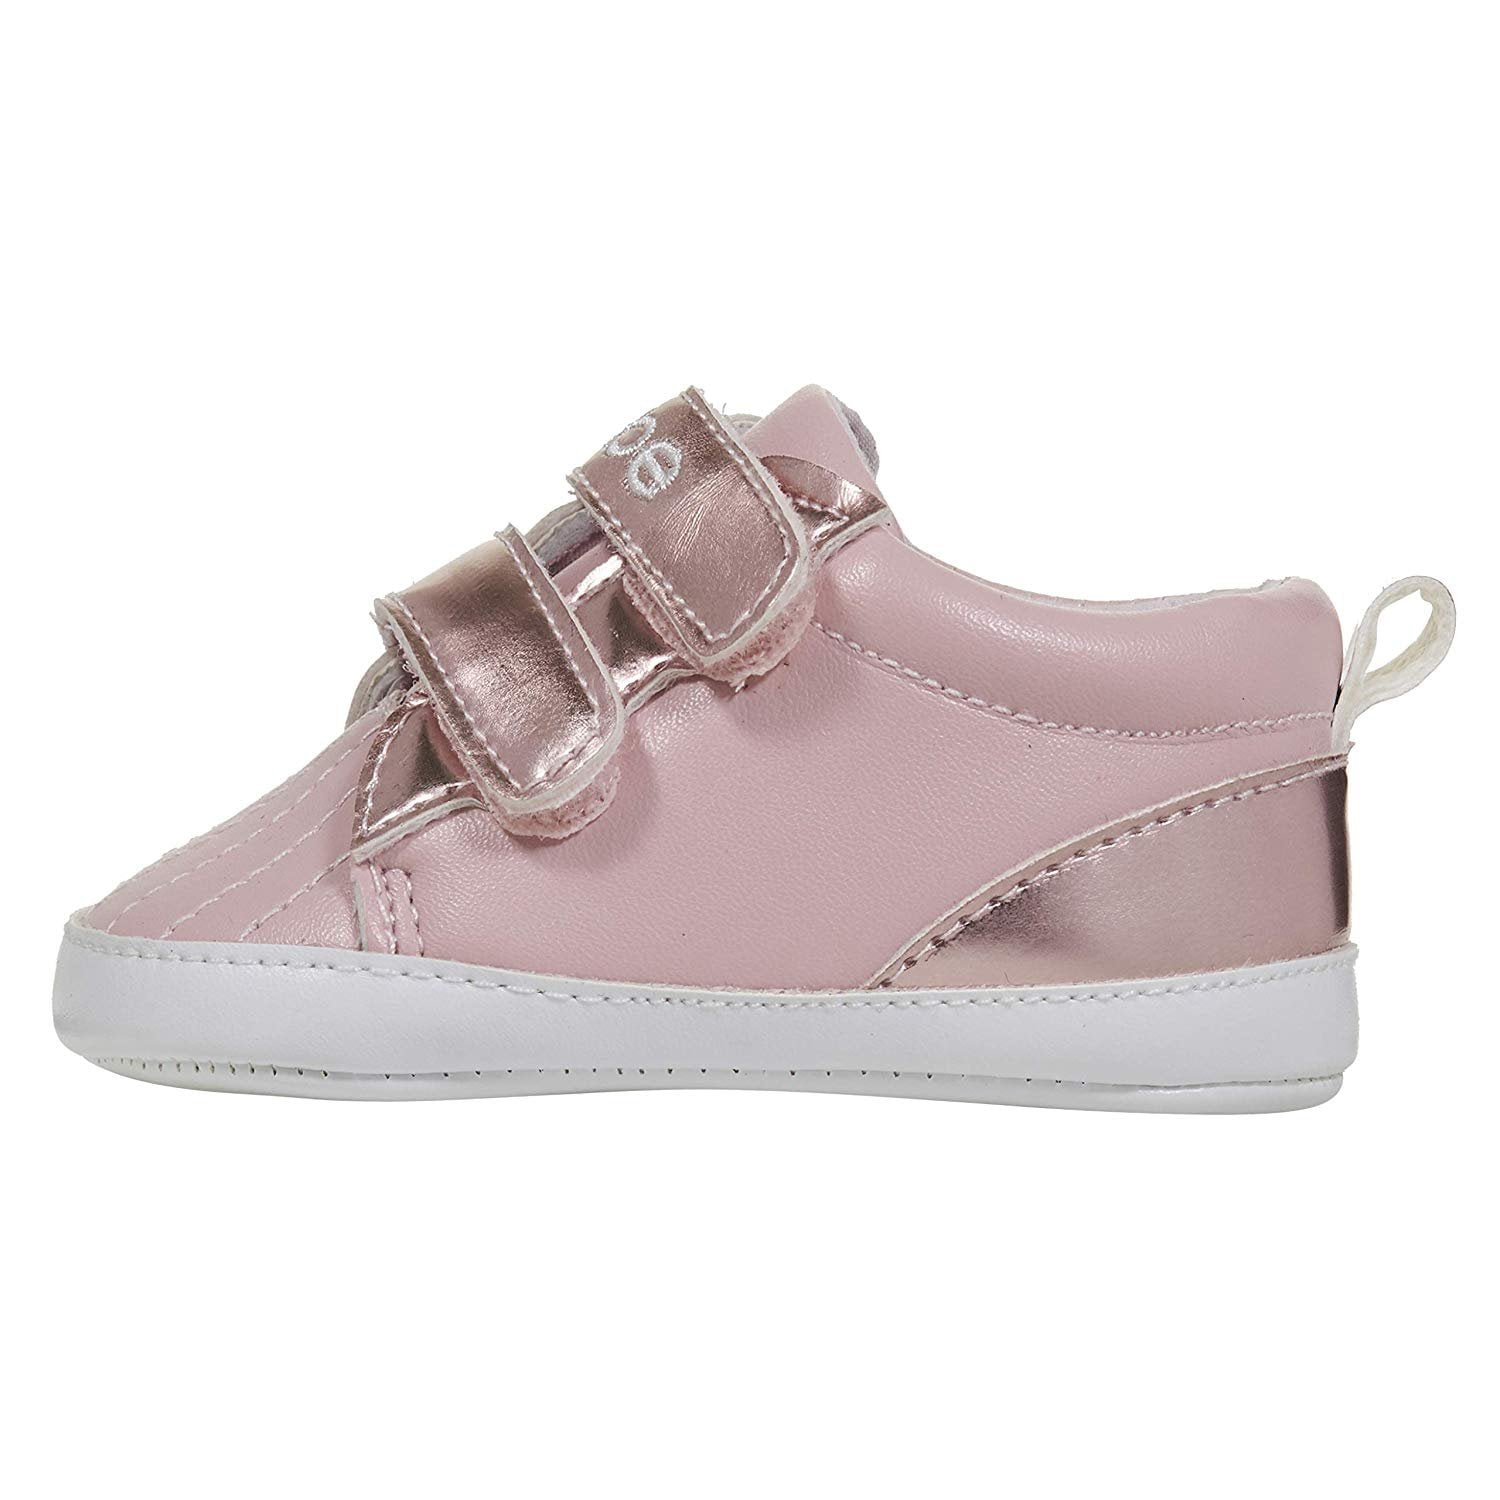 baby girl sneakers size 4